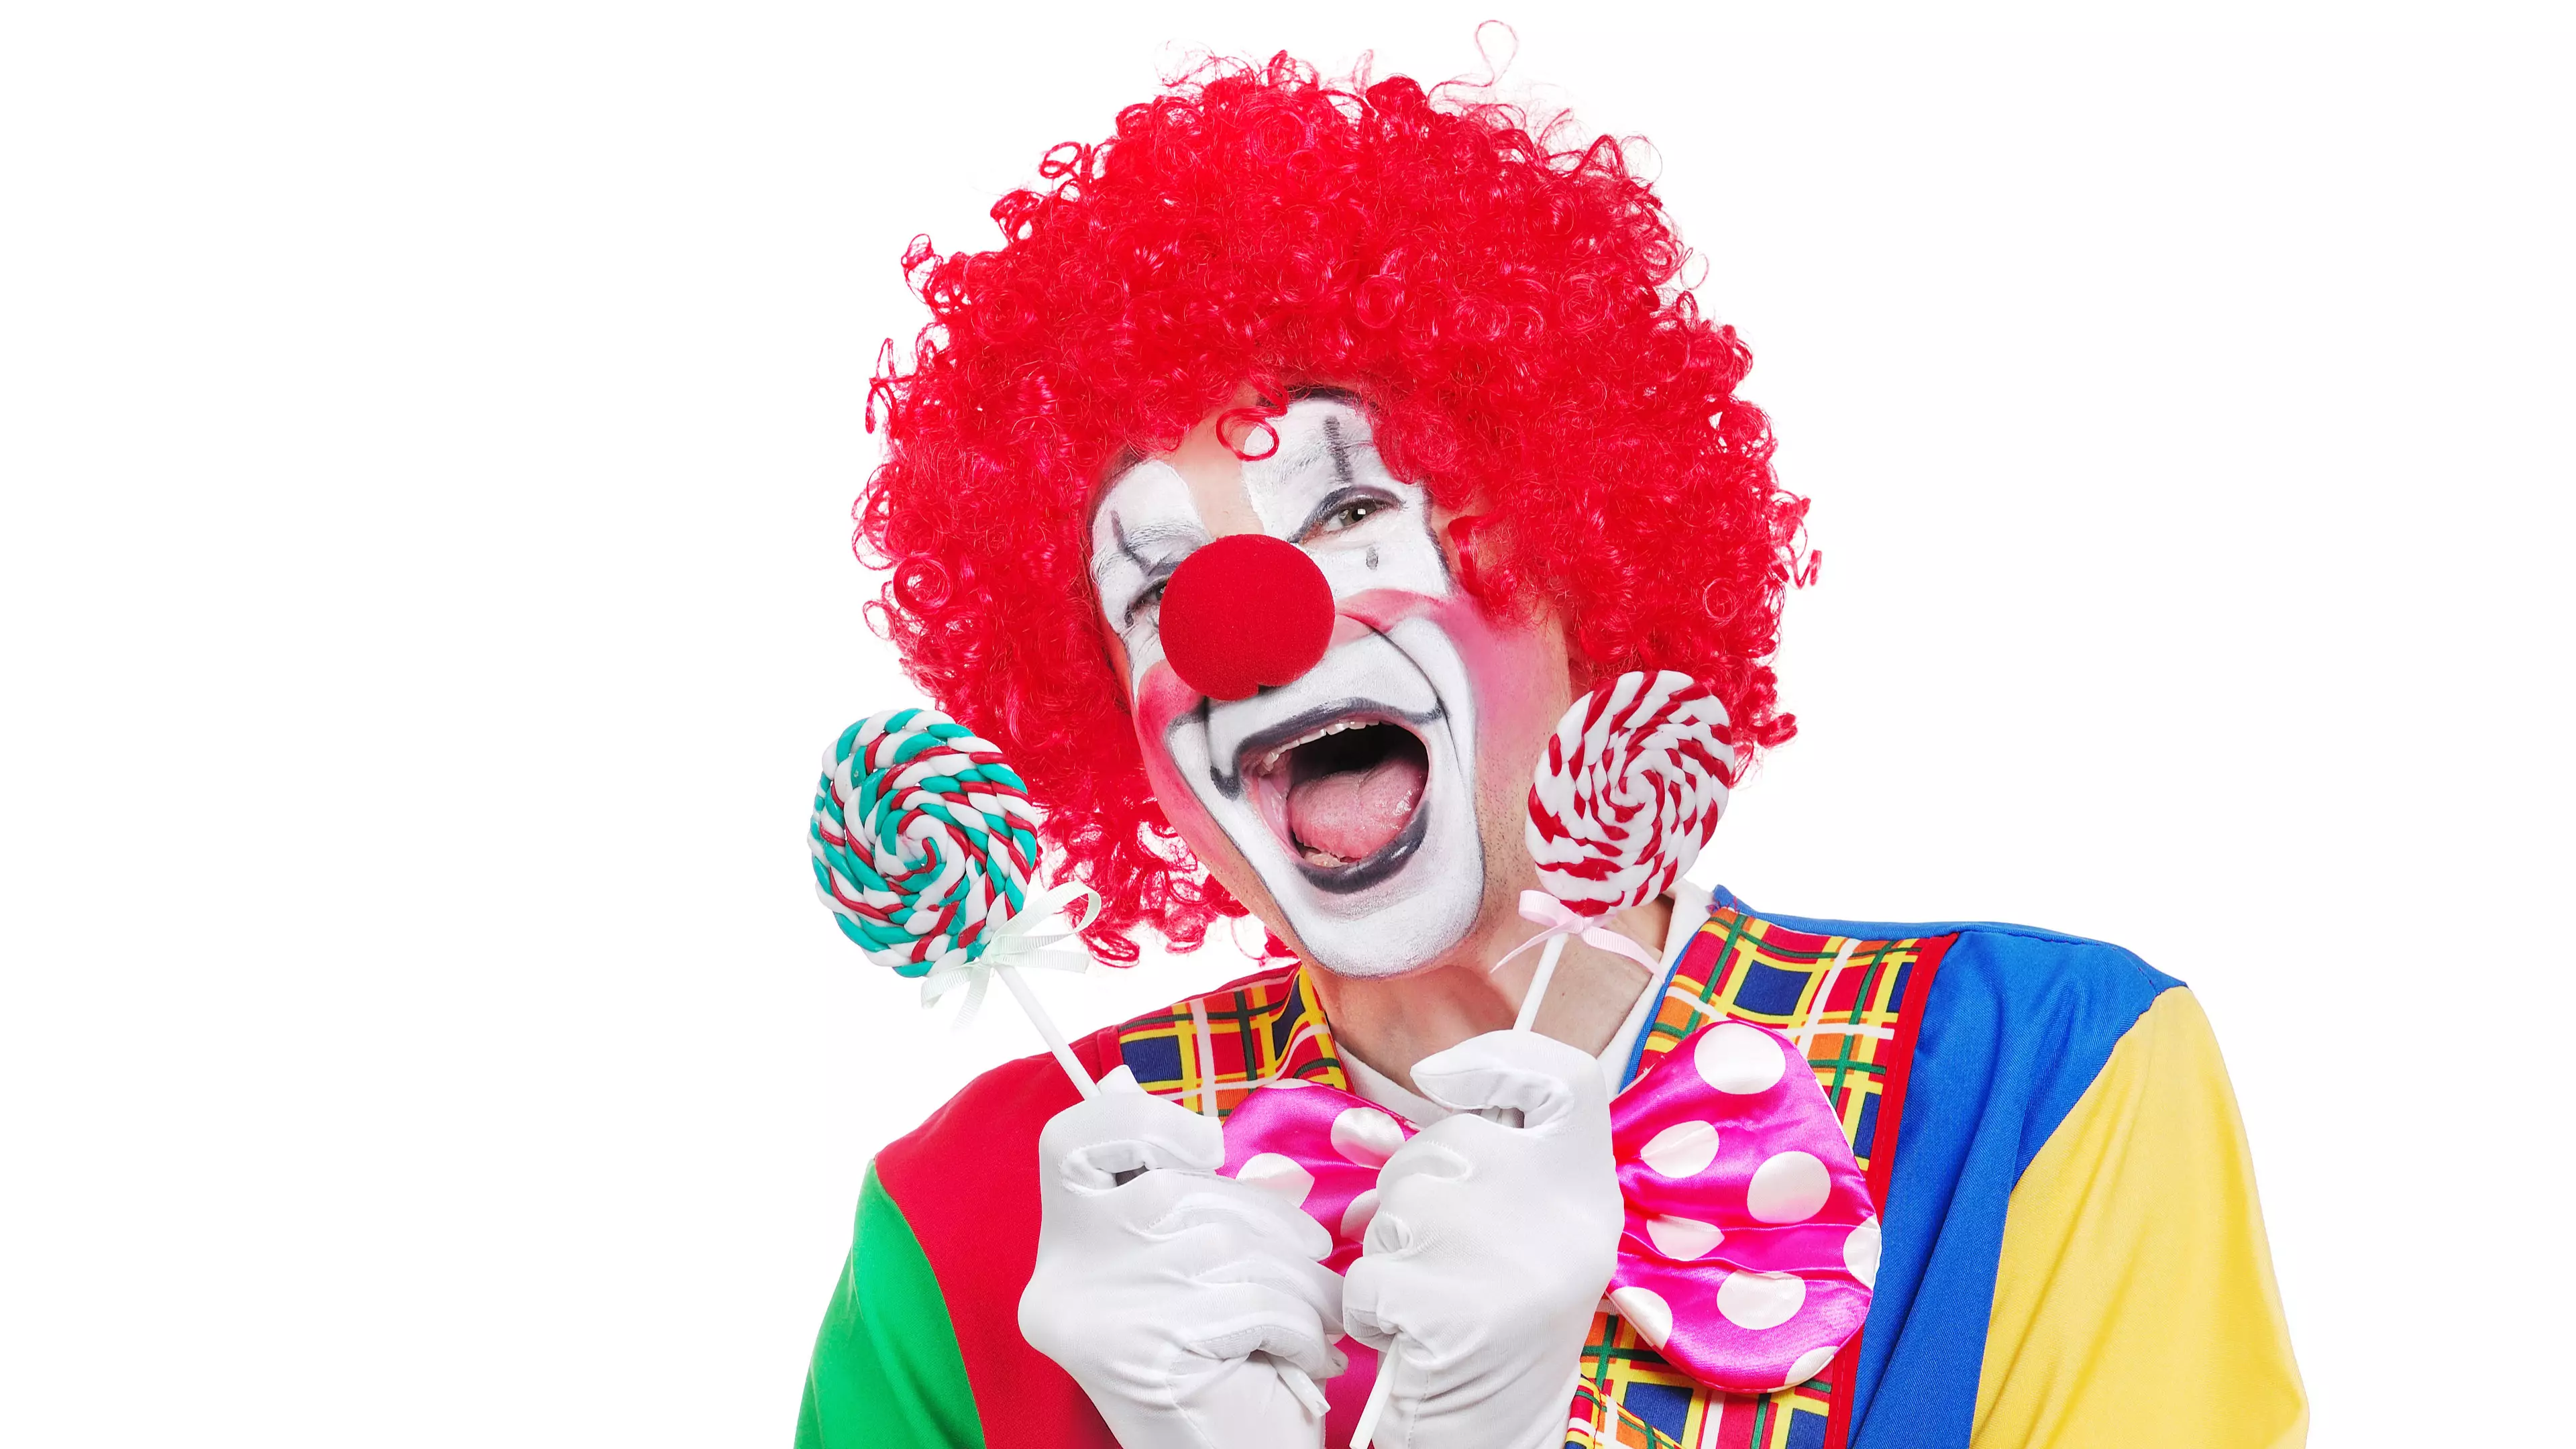 A Circus Is Looking To Hire Some Clowns, If You Happen To Know Anyone